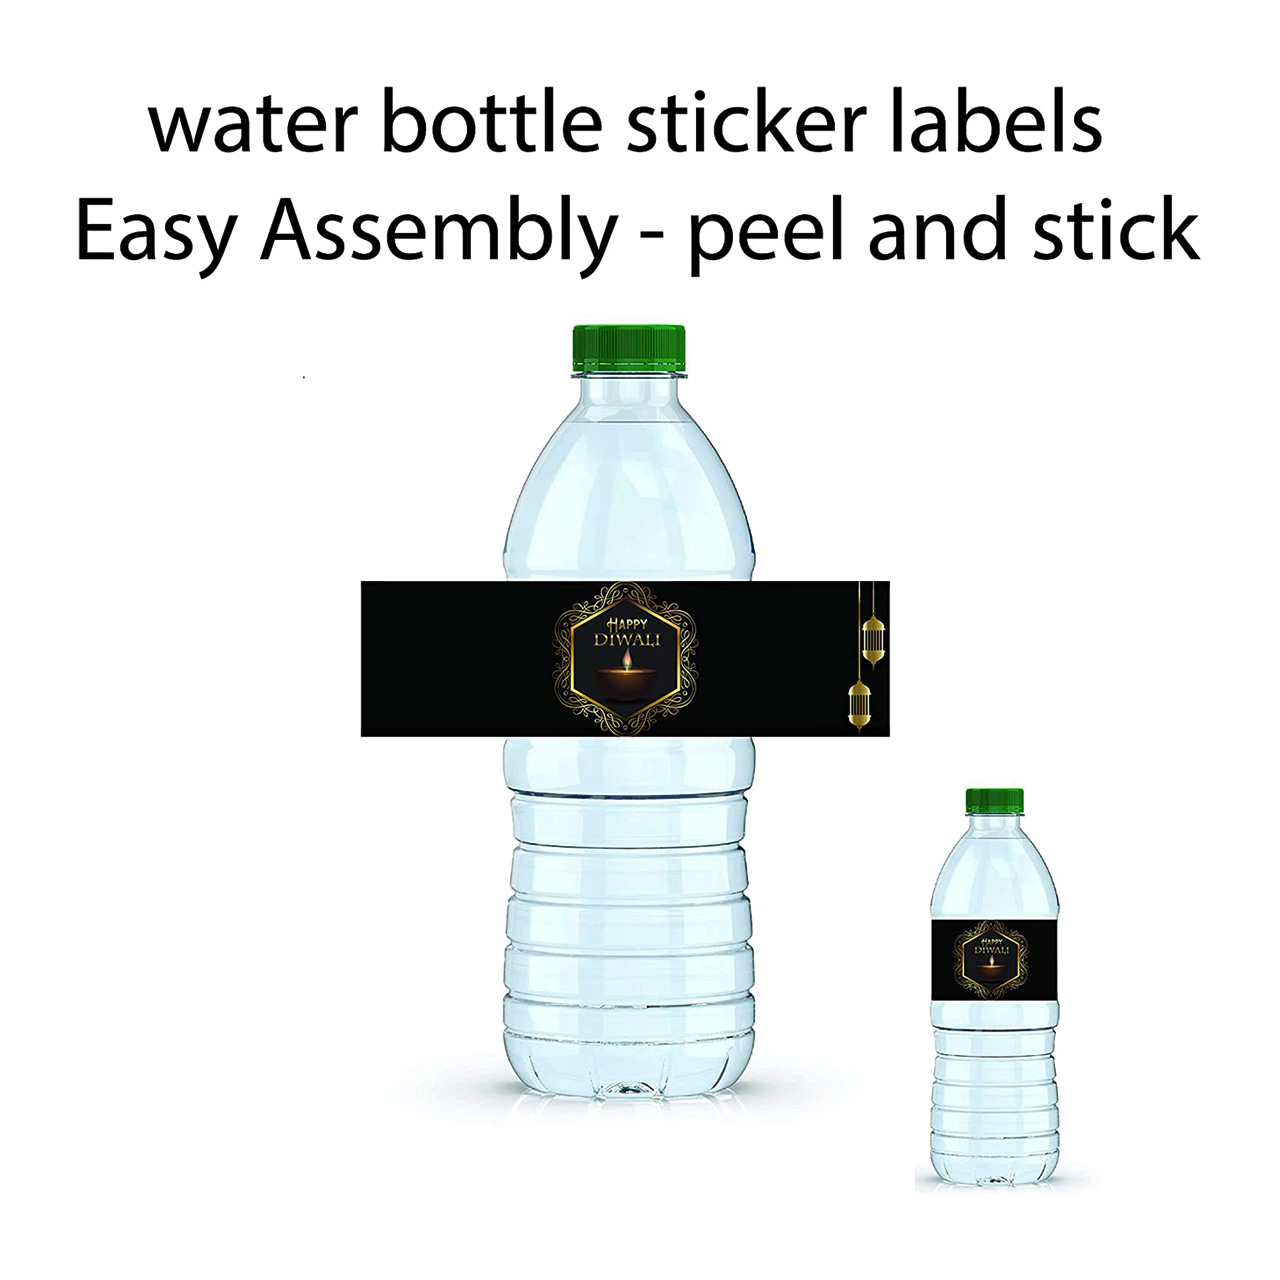 Diwali water bottle labels are professionally printed on a sticker paper with a glossy coating Diwali Water Bottle Sticker Labels INCLUDES 20 DIY water bottle labels Water bottle stickers each SIZE 85 wide x 2 tall perfect for any beverage bottle or container less than 85 in diameter Diwali Water Bottle Labels will make coordinated beverages and Add Diwali Water Bottle Labels to standard water bottles mini water bottles soda bottles and single serving juice containers Note This listing is for water bottle labels only No other items or staging items included